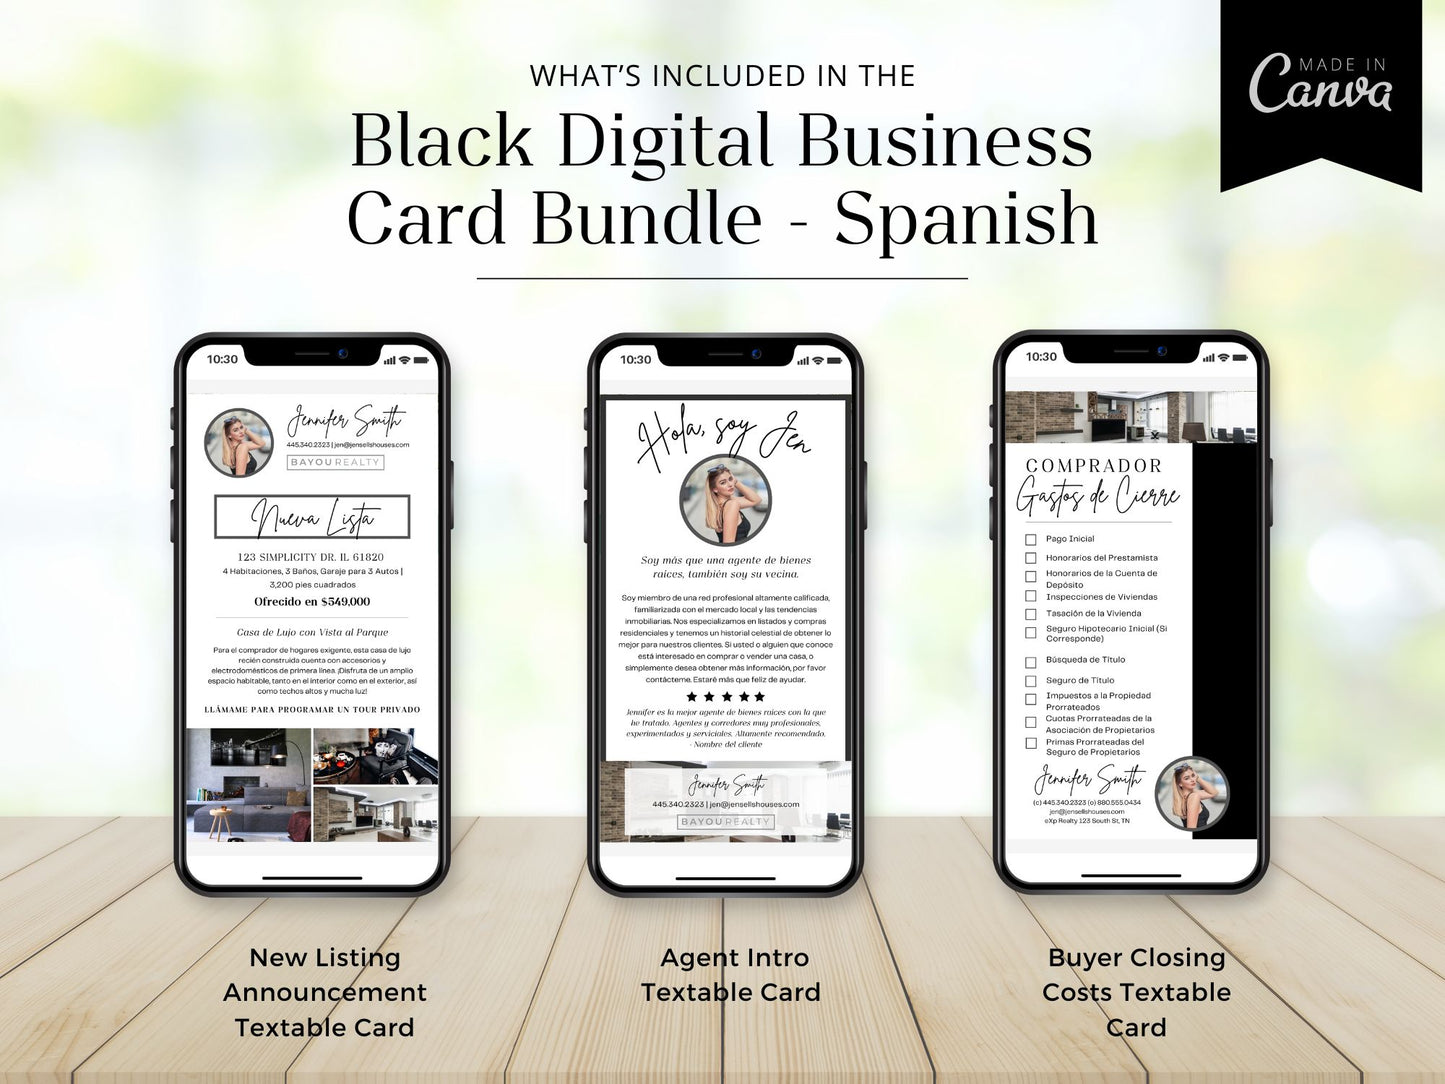 Spanish Black Real Estate Textable Bundle - Power up your real estate marketing strategy with our professional textables in Spanish.